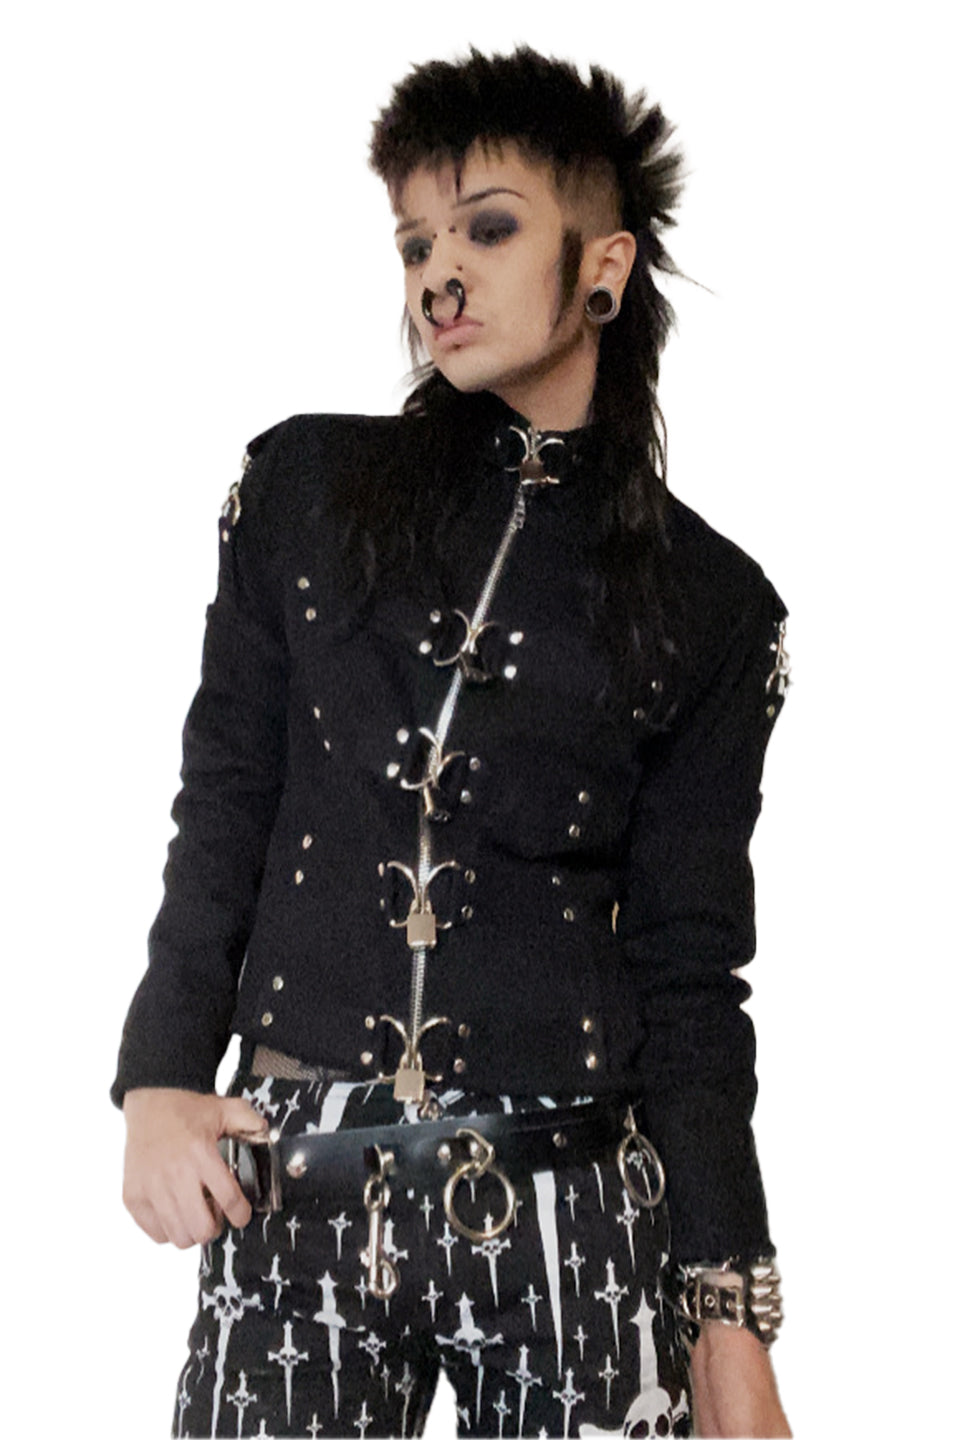 Lip Service Institutionalized Twill Straight Jacket-Tops-Lip Service